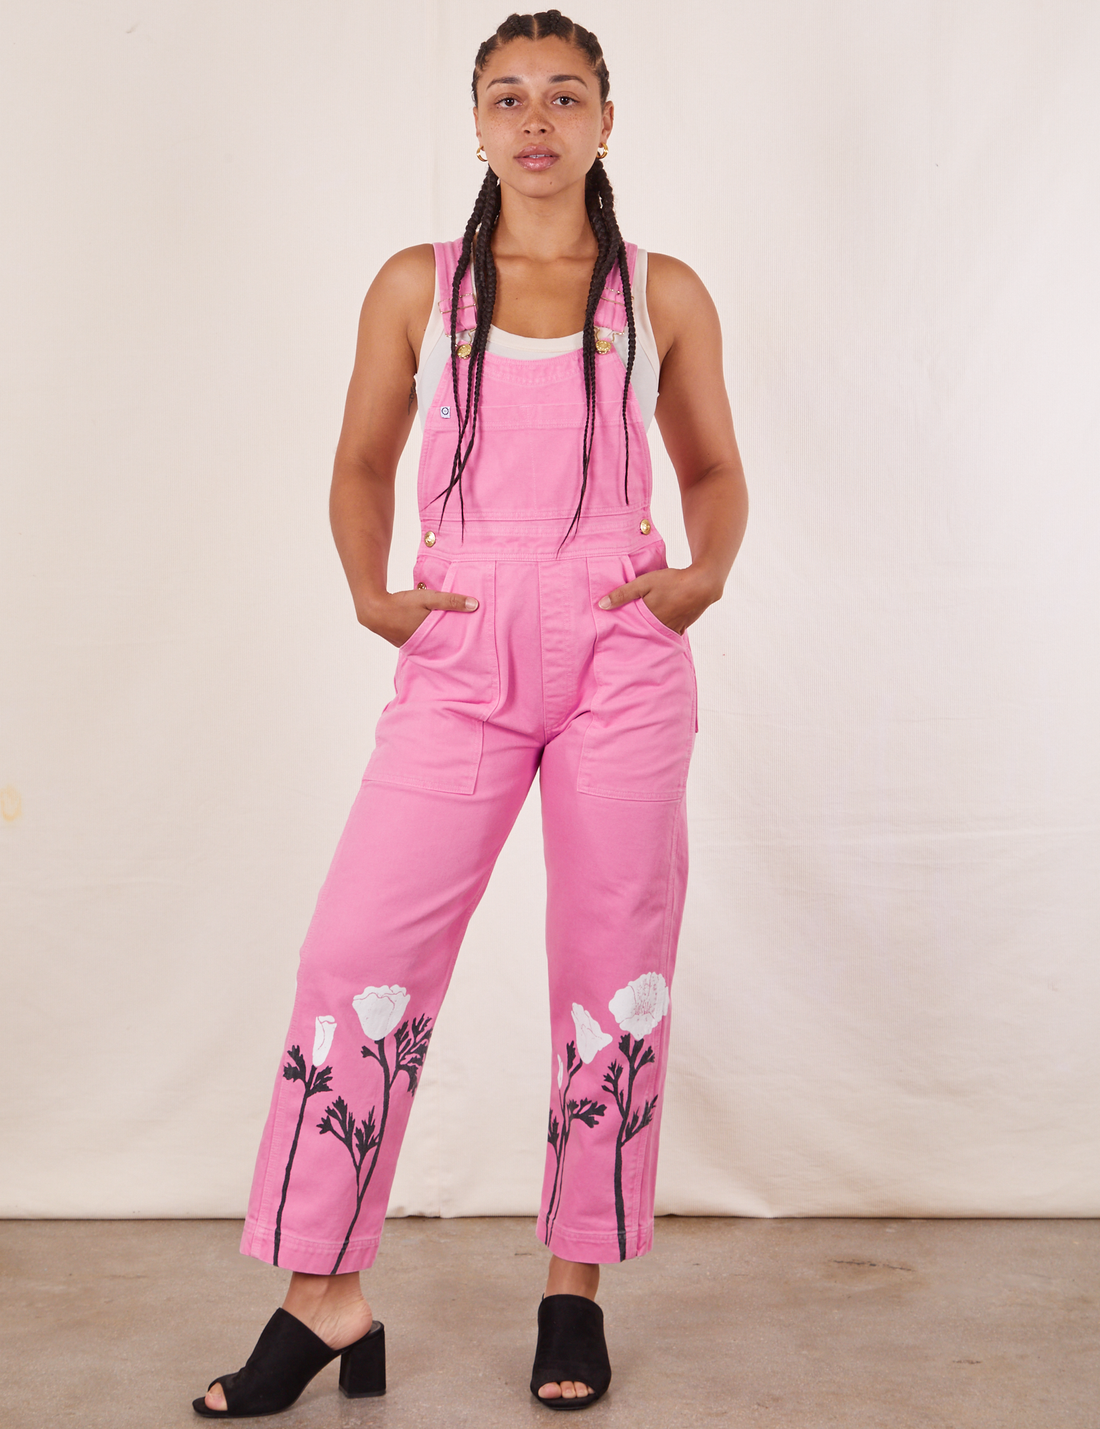 Gabi is 5'7" and wearing XXS California Poppy Overalls in Bubblegum Pink with a vintage off-white Tank Top underneath. She has both hands in the pockets.